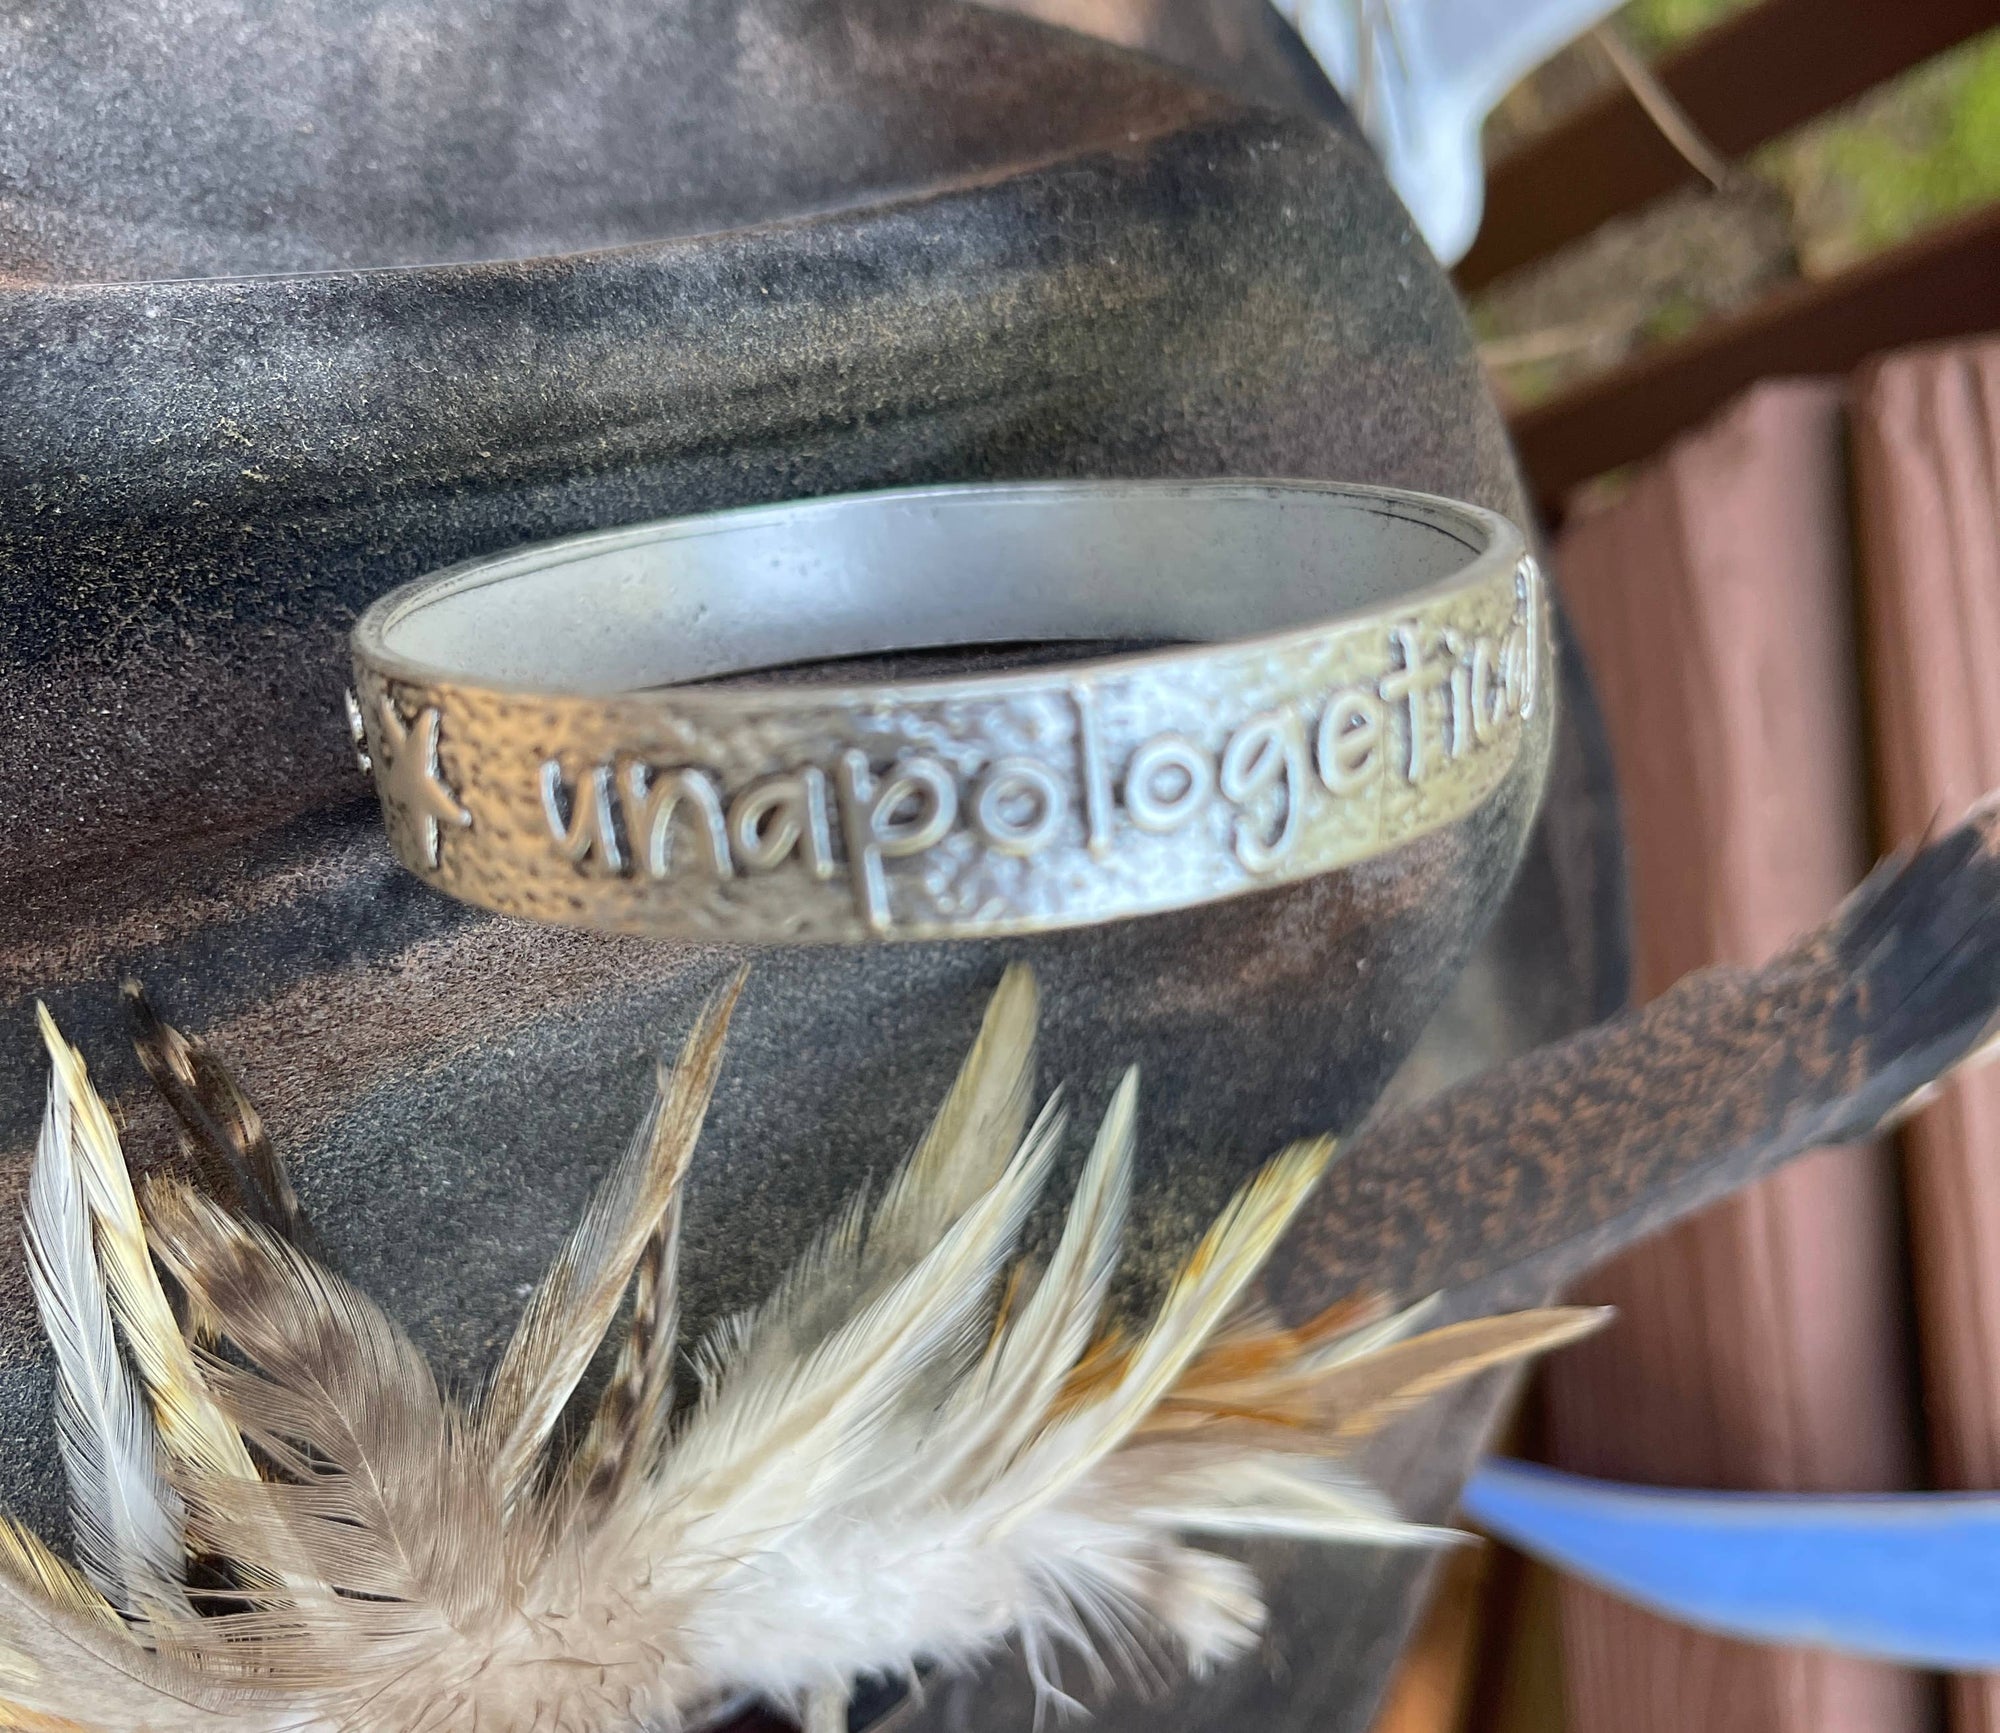 "Unapologetically Me" Burnished Silver Tone Bangle